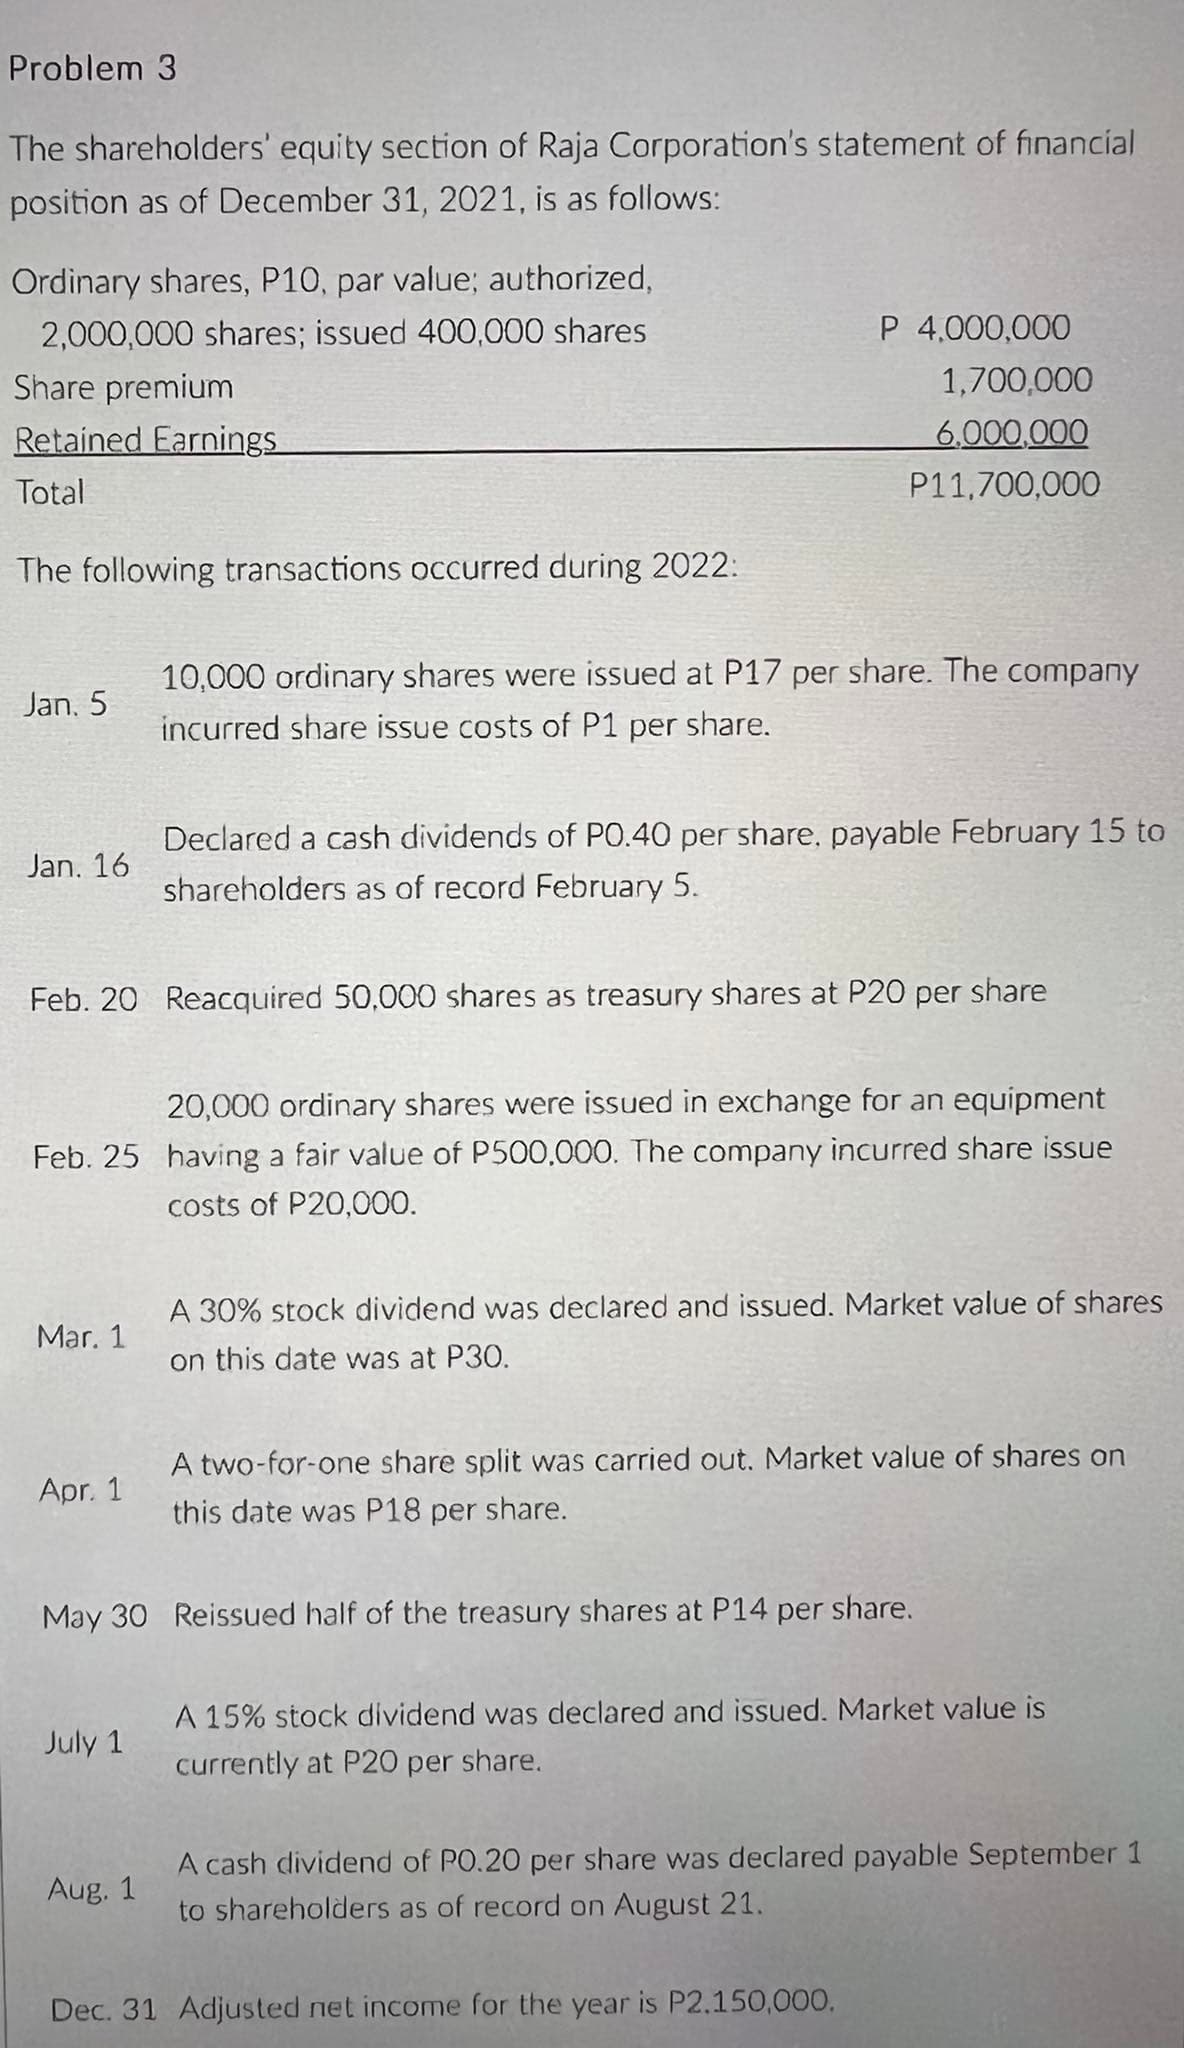 Problem 3
The shareholders' equity section of Raja Corporation's statement of financial
position as of December 31, 2021, is as follows:
Ordinary shares, P10, par value; authorized,
2,000,000 shares; issued 400,000 shares
P 4,000,000
Share premium
1,700,000
Retained Earnings
6,000,000
Total
P11,700,000
The following transactions occurred during 2022:
10,000 ordinary shares were issued at P17 per share. The company
Jan, 5
incurred share issue costs of P1 per share.
Declared a cash dividends of PO.40 per share, payable February 15 to
Jan. 16
shareholders as of record February 5.
Feb. 20 Reacquired 50,000 shares as treasury shares at P20 per share
20,000 ordinary shares were issued in exchange for an equipment
Feb. 25 having a fair value of P500,000. The company incurred share issue
costs of P20,000.
A 30% stock dividend was declared and issued. Market value of shares
Mar. 1
on this date was at P30.
A two-for-one share split was carried out. Market value of shares on
Apr. 1
this date was P18 per share.
May 30 Reissued half of the treasury shares at P14 per share.
A 15% stock dividend was declared and issued. Market value is
July 1
currently at P20 per share.
A cash dividend of PO.20 per share was declared payable September 1
Aug. 1
to shareholders as of record on August 21.
Dec. 31 Adjusted net income for the year is P2.150,000.
